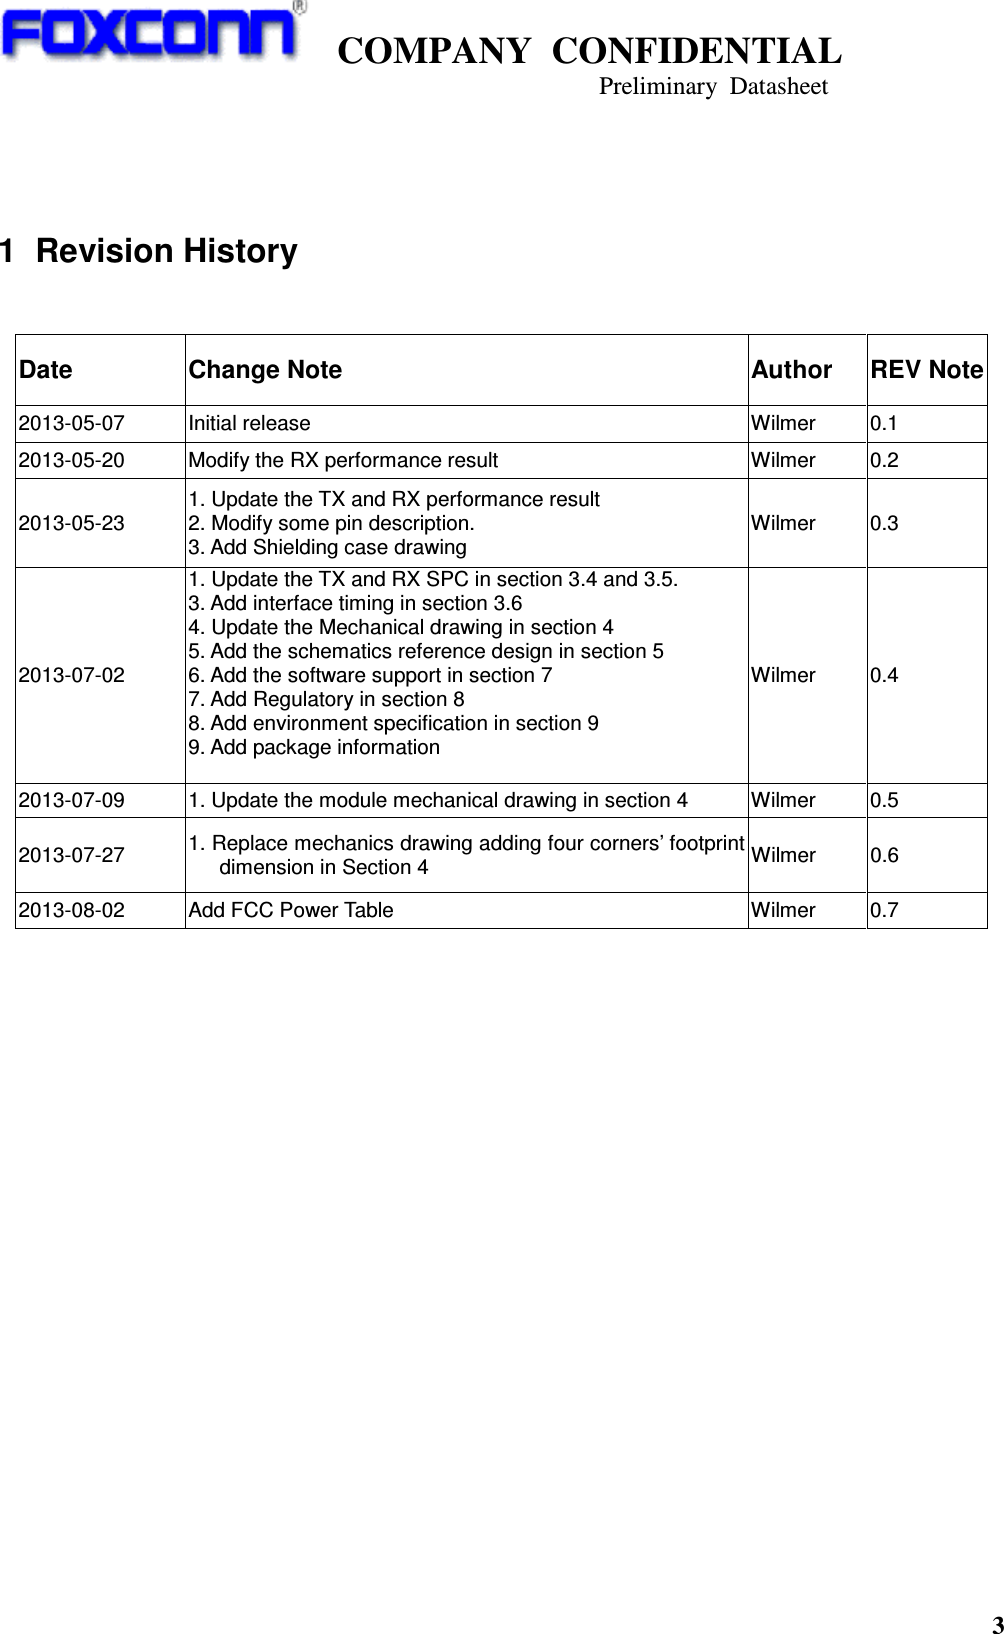    COMPANY  CONFIDENTIAL                                                                     Preliminary  Datasheet 3      1  Revision History   Date  Change Note  Author  REV Note 2013-05-07  Initial release  Wilmer  0.1 2013-05-20  Modify the RX performance result  Wilmer  0.2 2013-05-23 1. Update the TX and RX performance result 2. Modify some pin description. 3. Add Shielding case drawing Wilmer  0.3 2013-07-02 1. Update the TX and RX SPC in section 3.4 and 3.5. 3. Add interface timing in section 3.6 4. Update the Mechanical drawing in section 4 5. Add the schematics reference design in section 5 6. Add the software support in section 7 7. Add Regulatory in section 8 8. Add environment specification in section 9 9. Add package information  Wilmer  0.4 2013-07-09  1. Update the module mechanical drawing in section 4  Wilmer  0.5 2013-07-27  1. Replace mechanics drawing adding four corners’ footprint dimension in Section 4  Wilmer  0.6 2013-08-02  Add FCC Power Table  Wilmer  0.7 